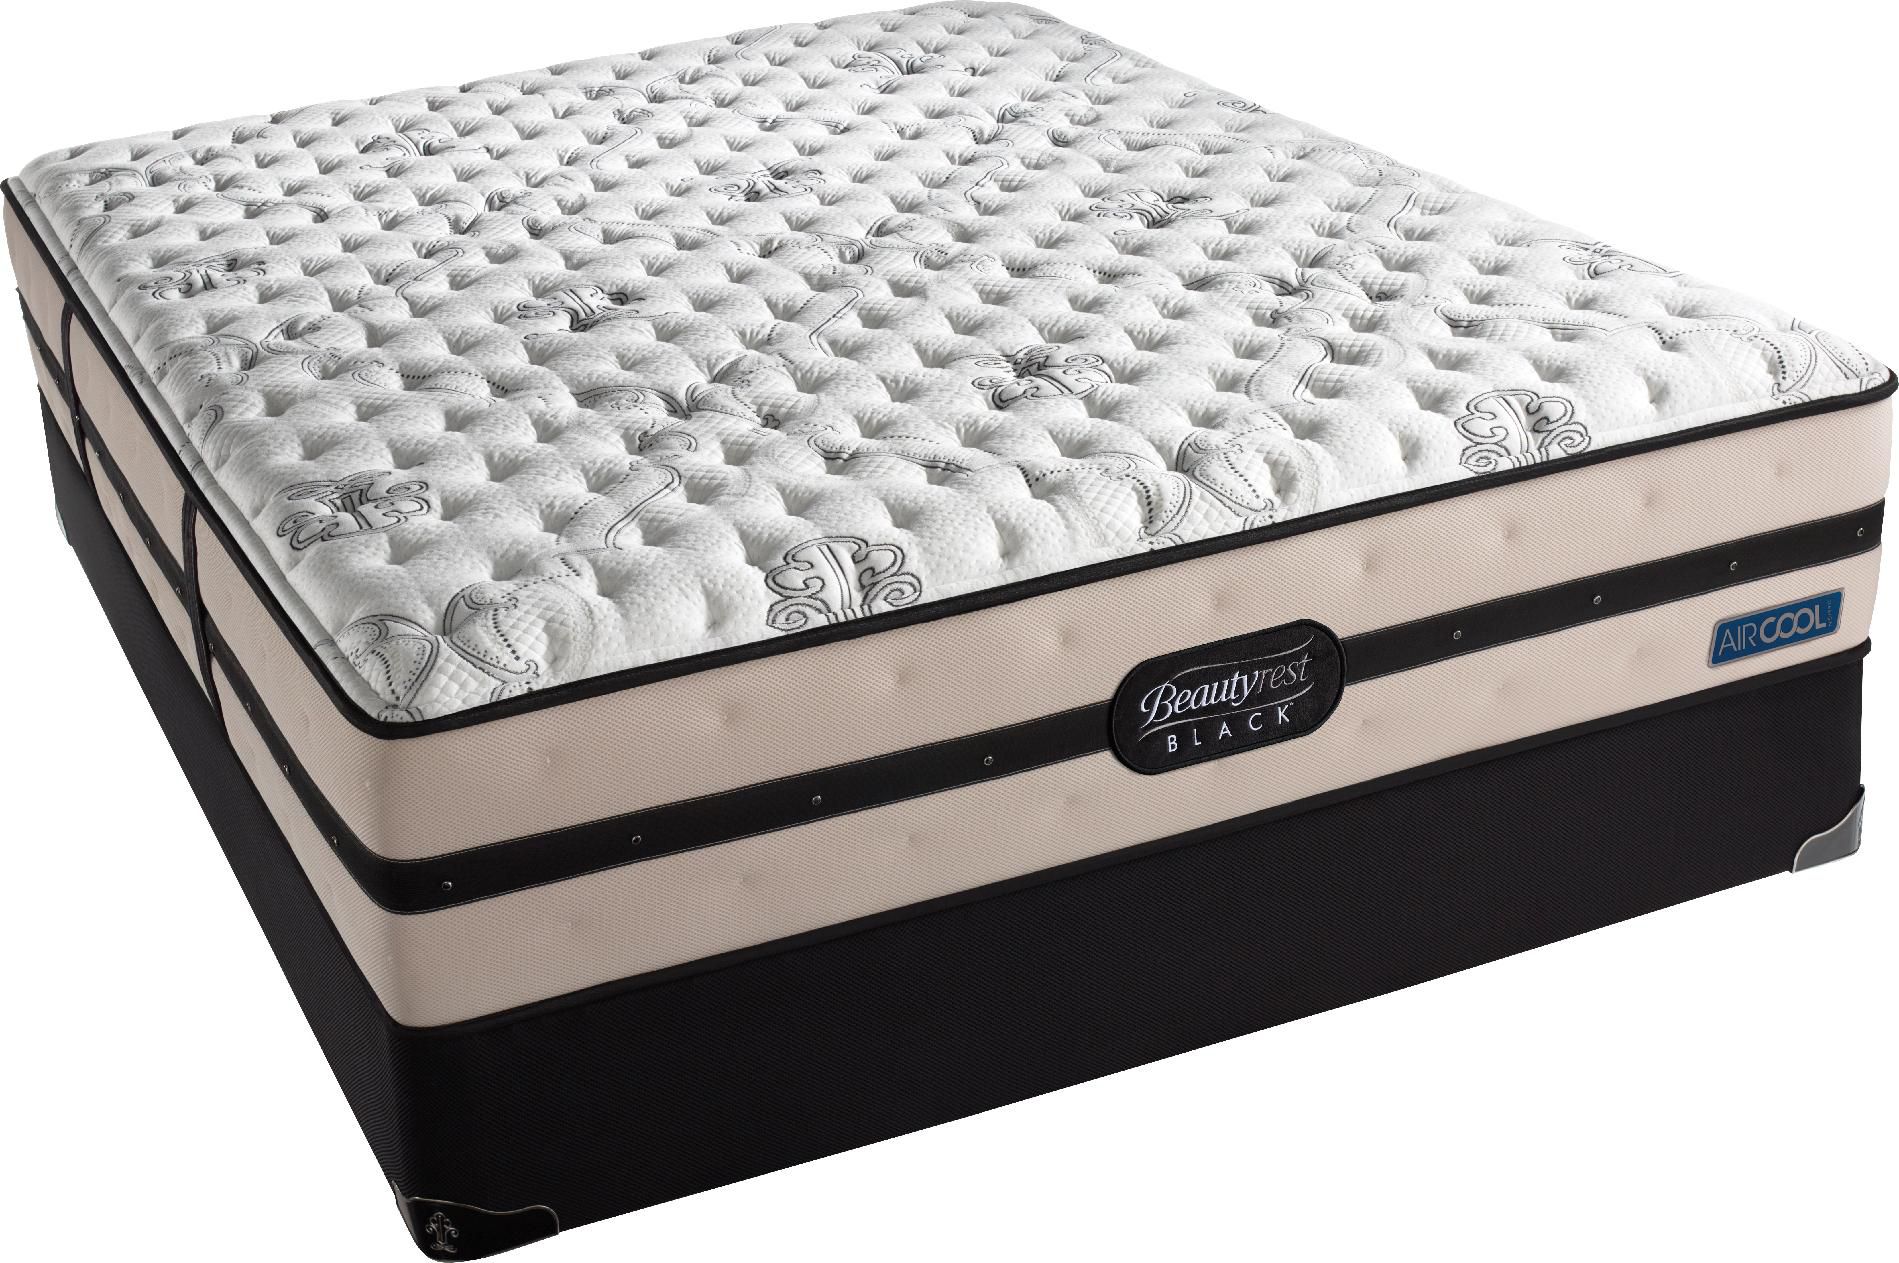 Beautyrest CLOSEOUT WHILE SUPPLIES LAST - Black Abrianna II Extra Firm Twin XL Mattress Only